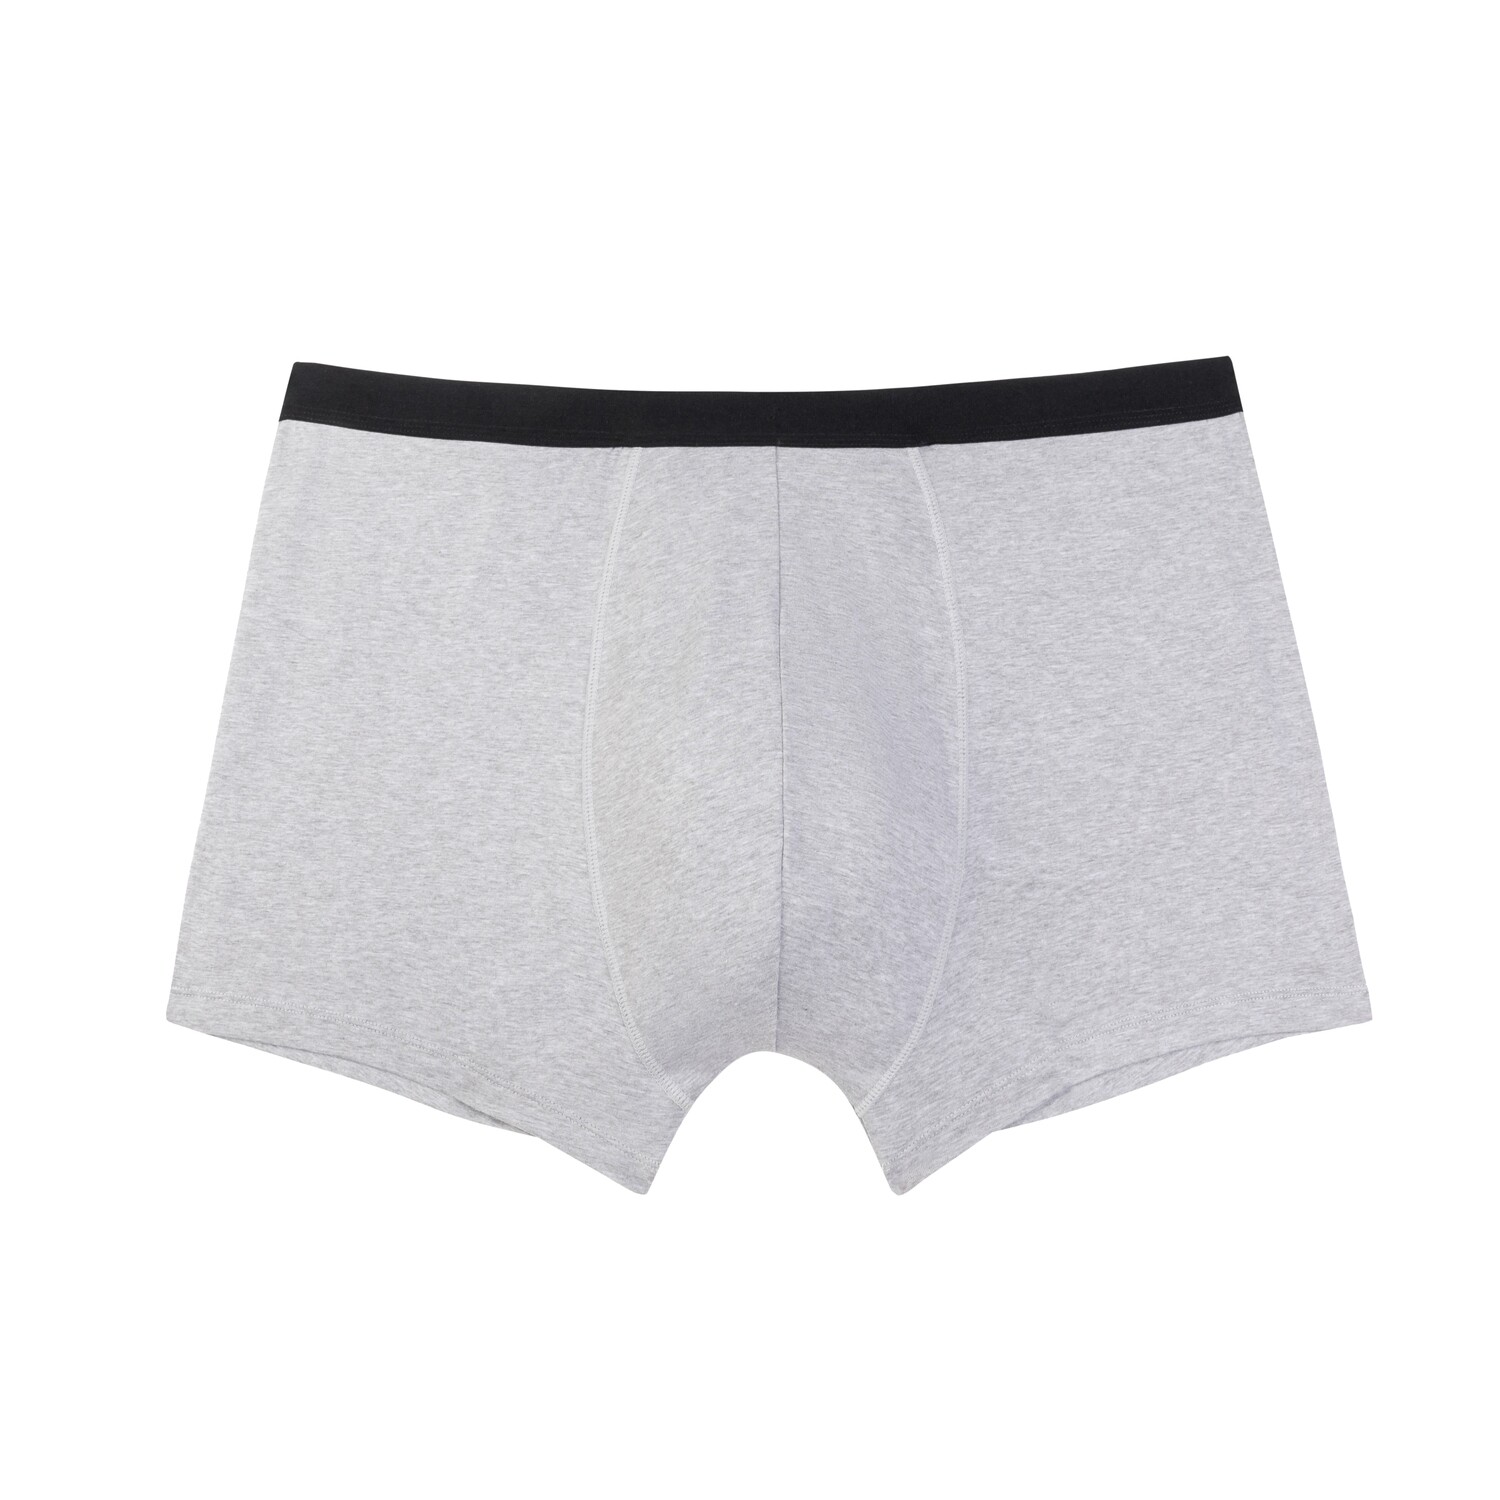 Urinary Incontinence Underwear For Men - Style 1